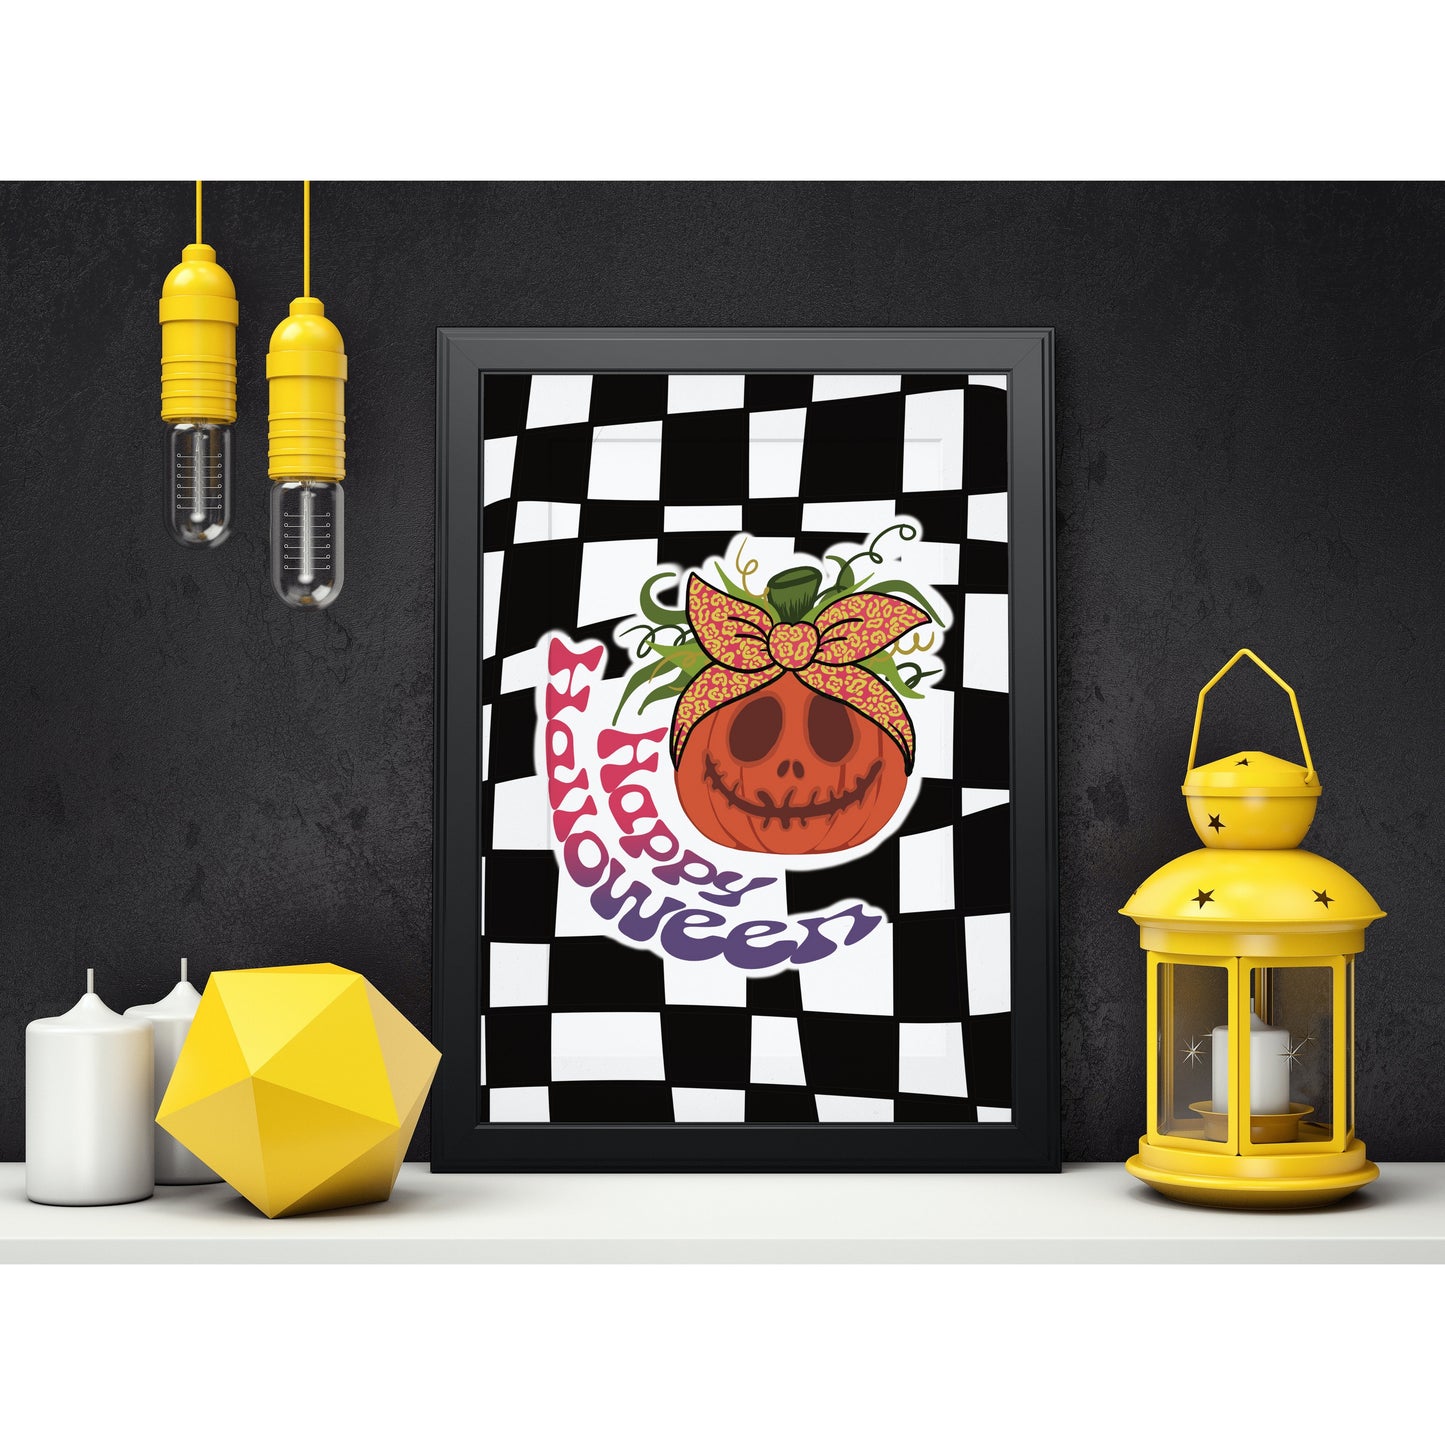 Introducing our Checkerboard Halloween Pumpkin Art Print! Plus, it has a distinctly Beetlejuice vibe that we just love. So if you're looking for a fun and unique way to celebrate Halloween this year, our Checkerboard Halloween Pumpkin Art Print is the perfect choice! Free Shipping on orders over £50.